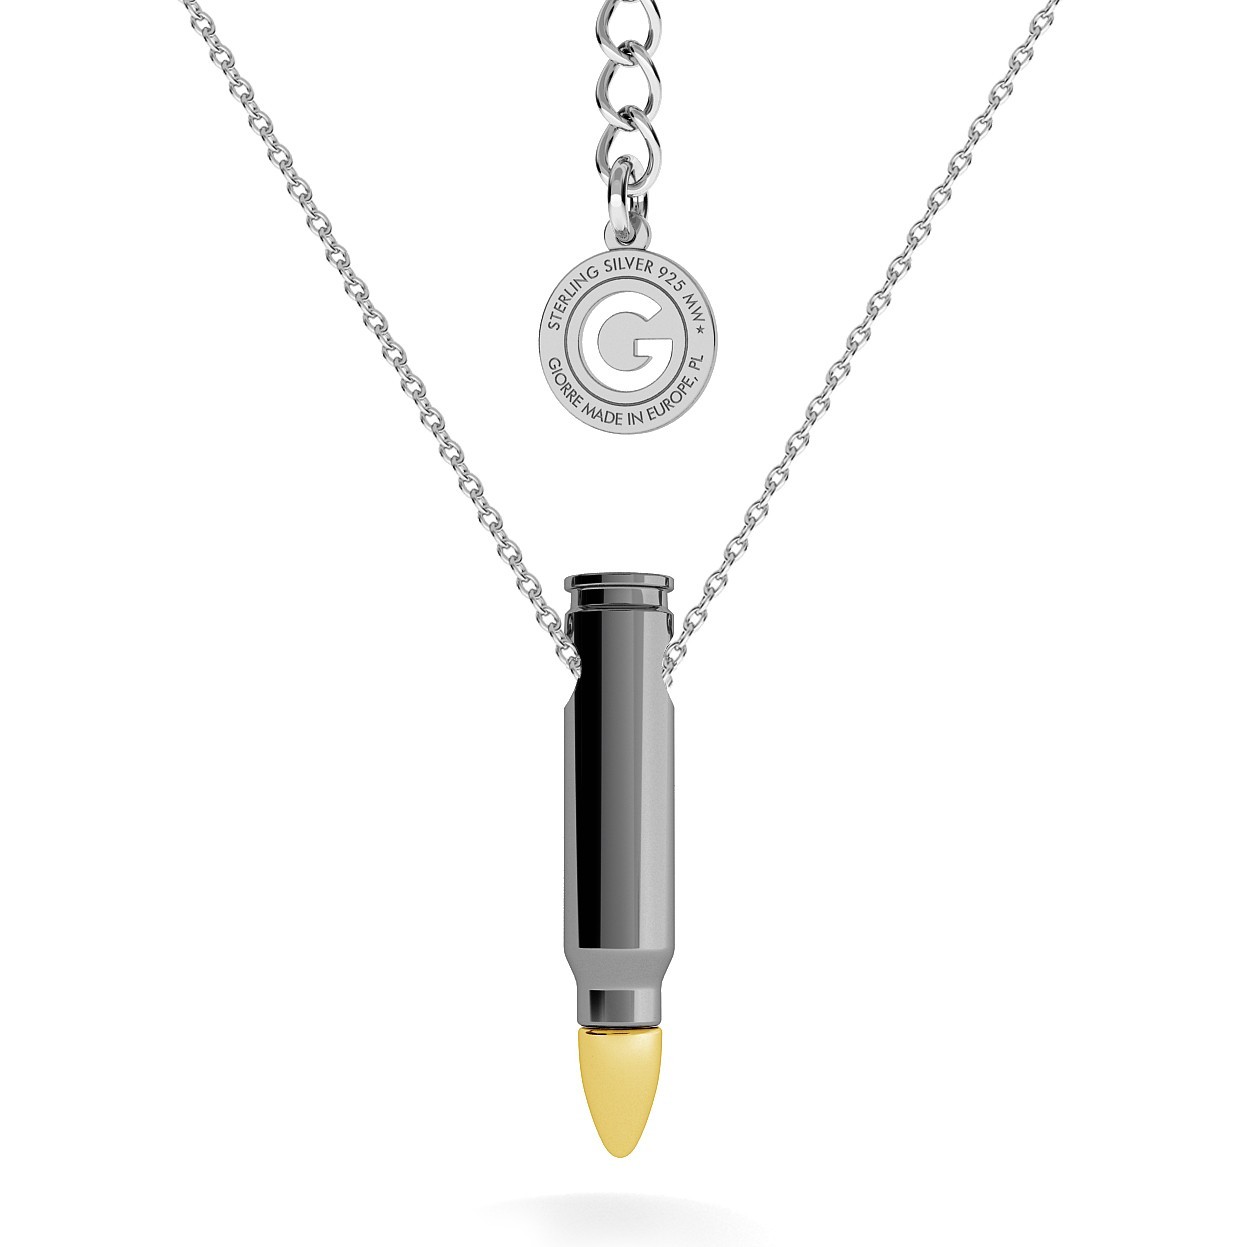 NECKLACE WITH BULLET - MODEL 2